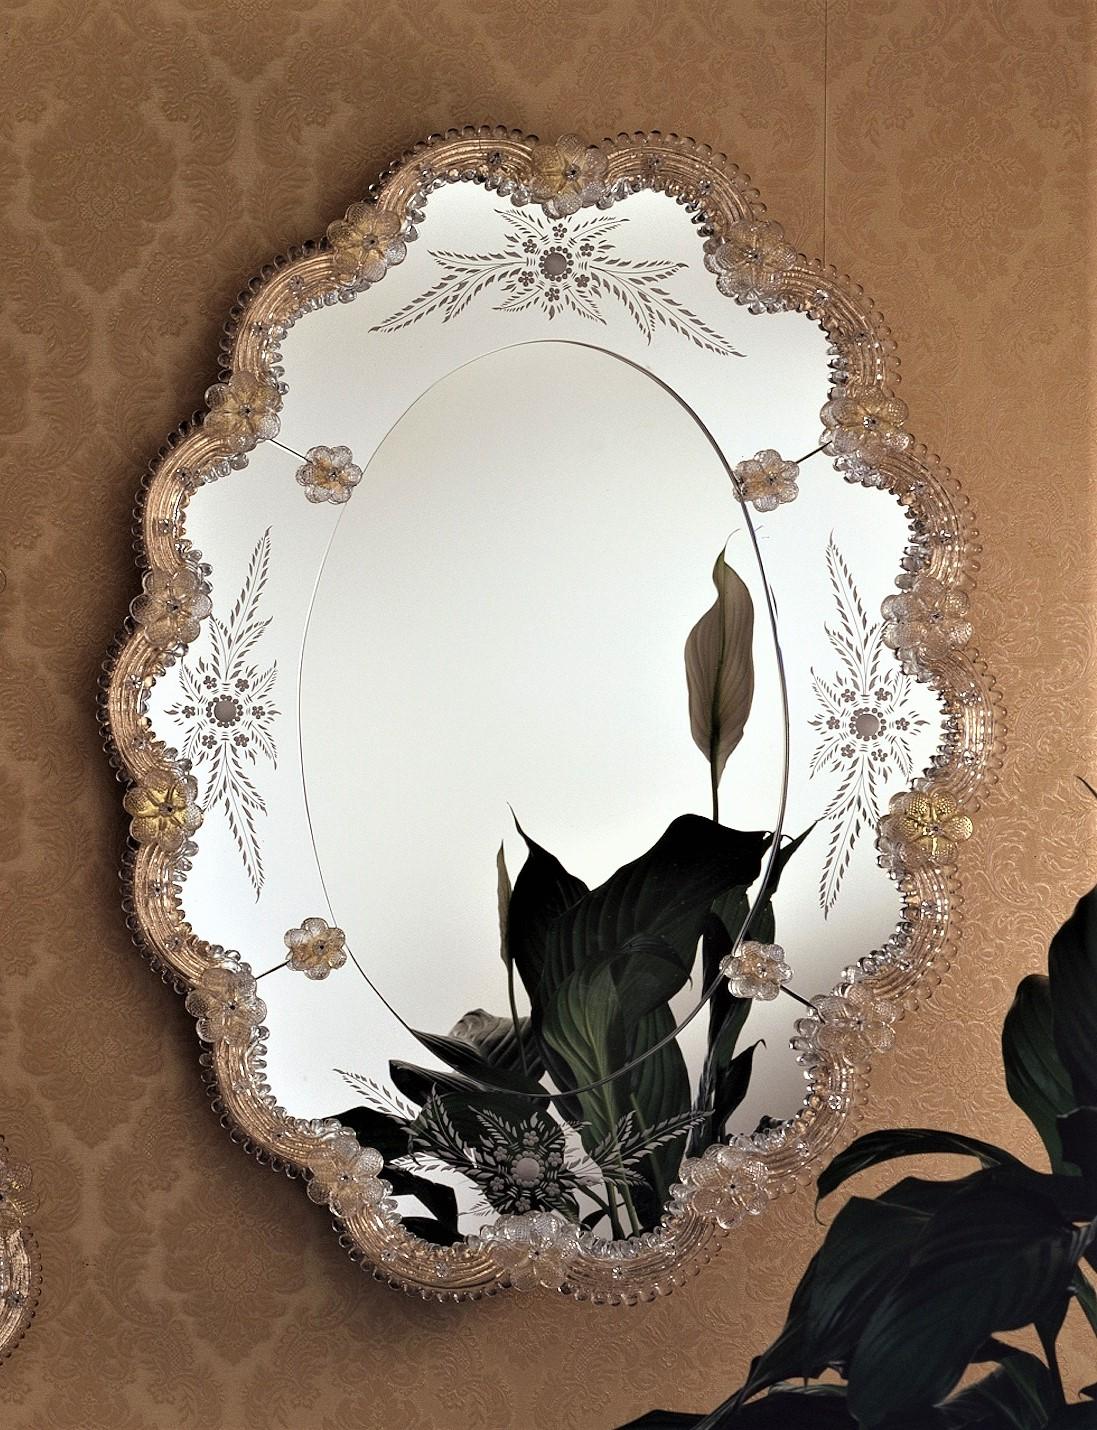  Murano glass mirror in Venetian Style, mirror made to a design by Fratelli Tosi, entirely handmade according to the techniques of our ancestors. Mirror composed of a crystal frame on a gold background, in Murano glass and decorated curls in Murano